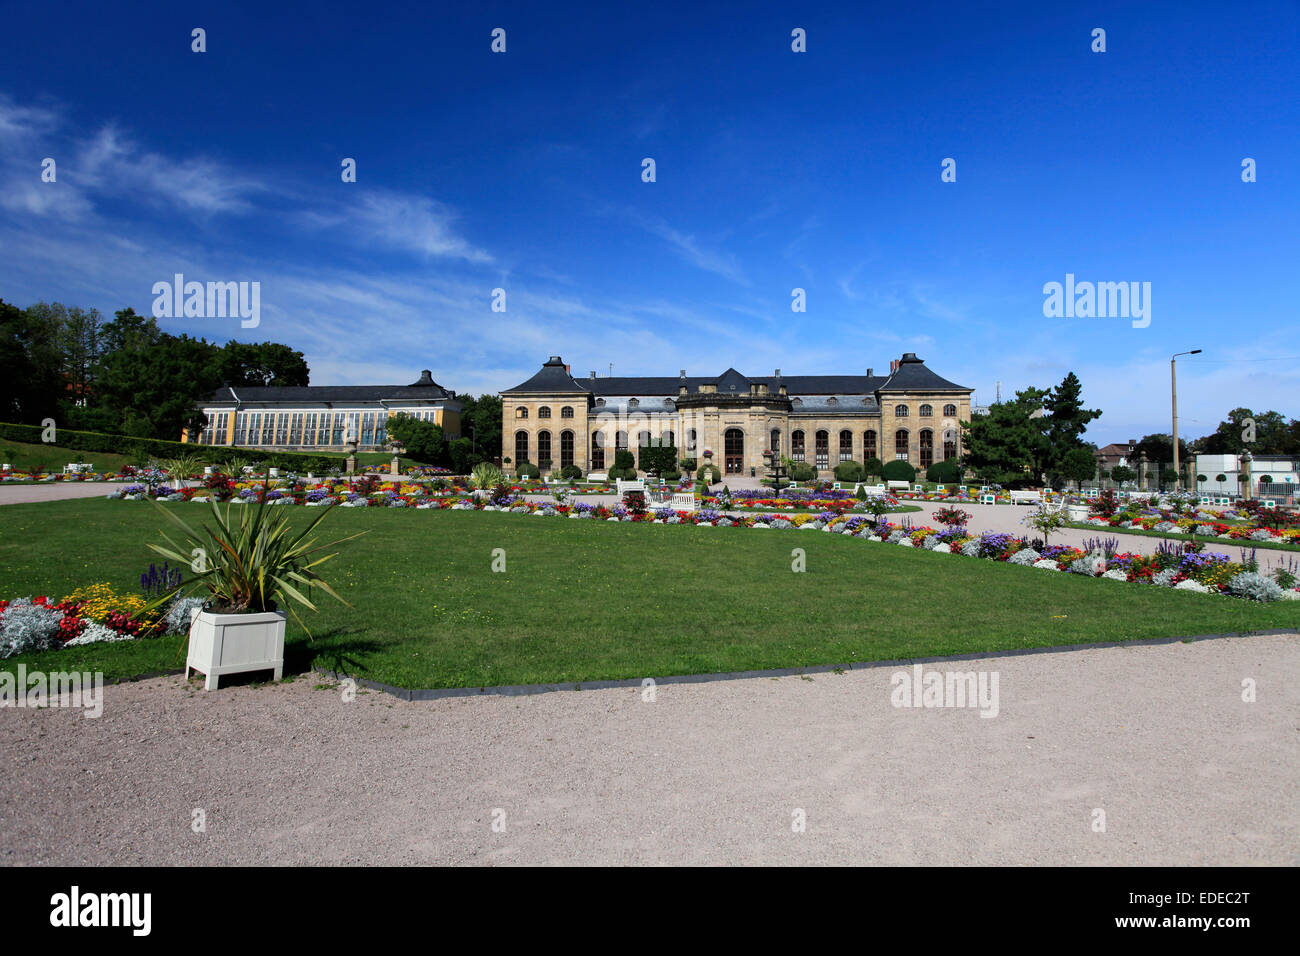 The orangery in Gotha is the park of the castle Friedenstein in Gotha, Germany. It is a gardens in the style of the late baroque. Photo: Klaus Nowottnick Date: September 03, 2012 Stock Photo